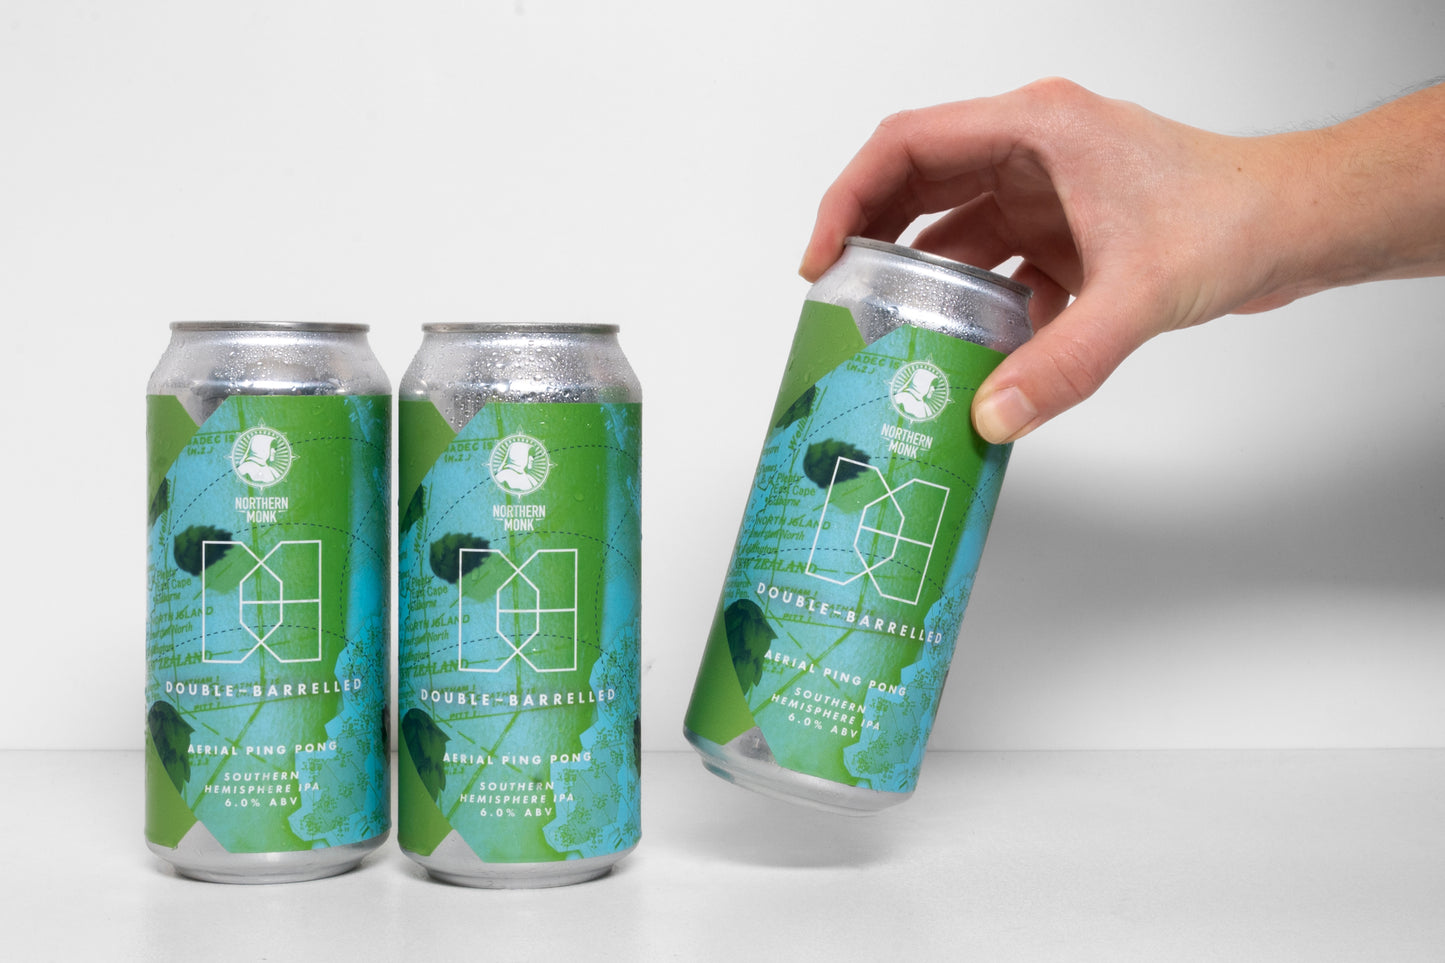 NORTHERN MONK // DOUBLE-BARRELLED // AERIAL PING PONG // SOUTHERN HEMISPHERE IPA